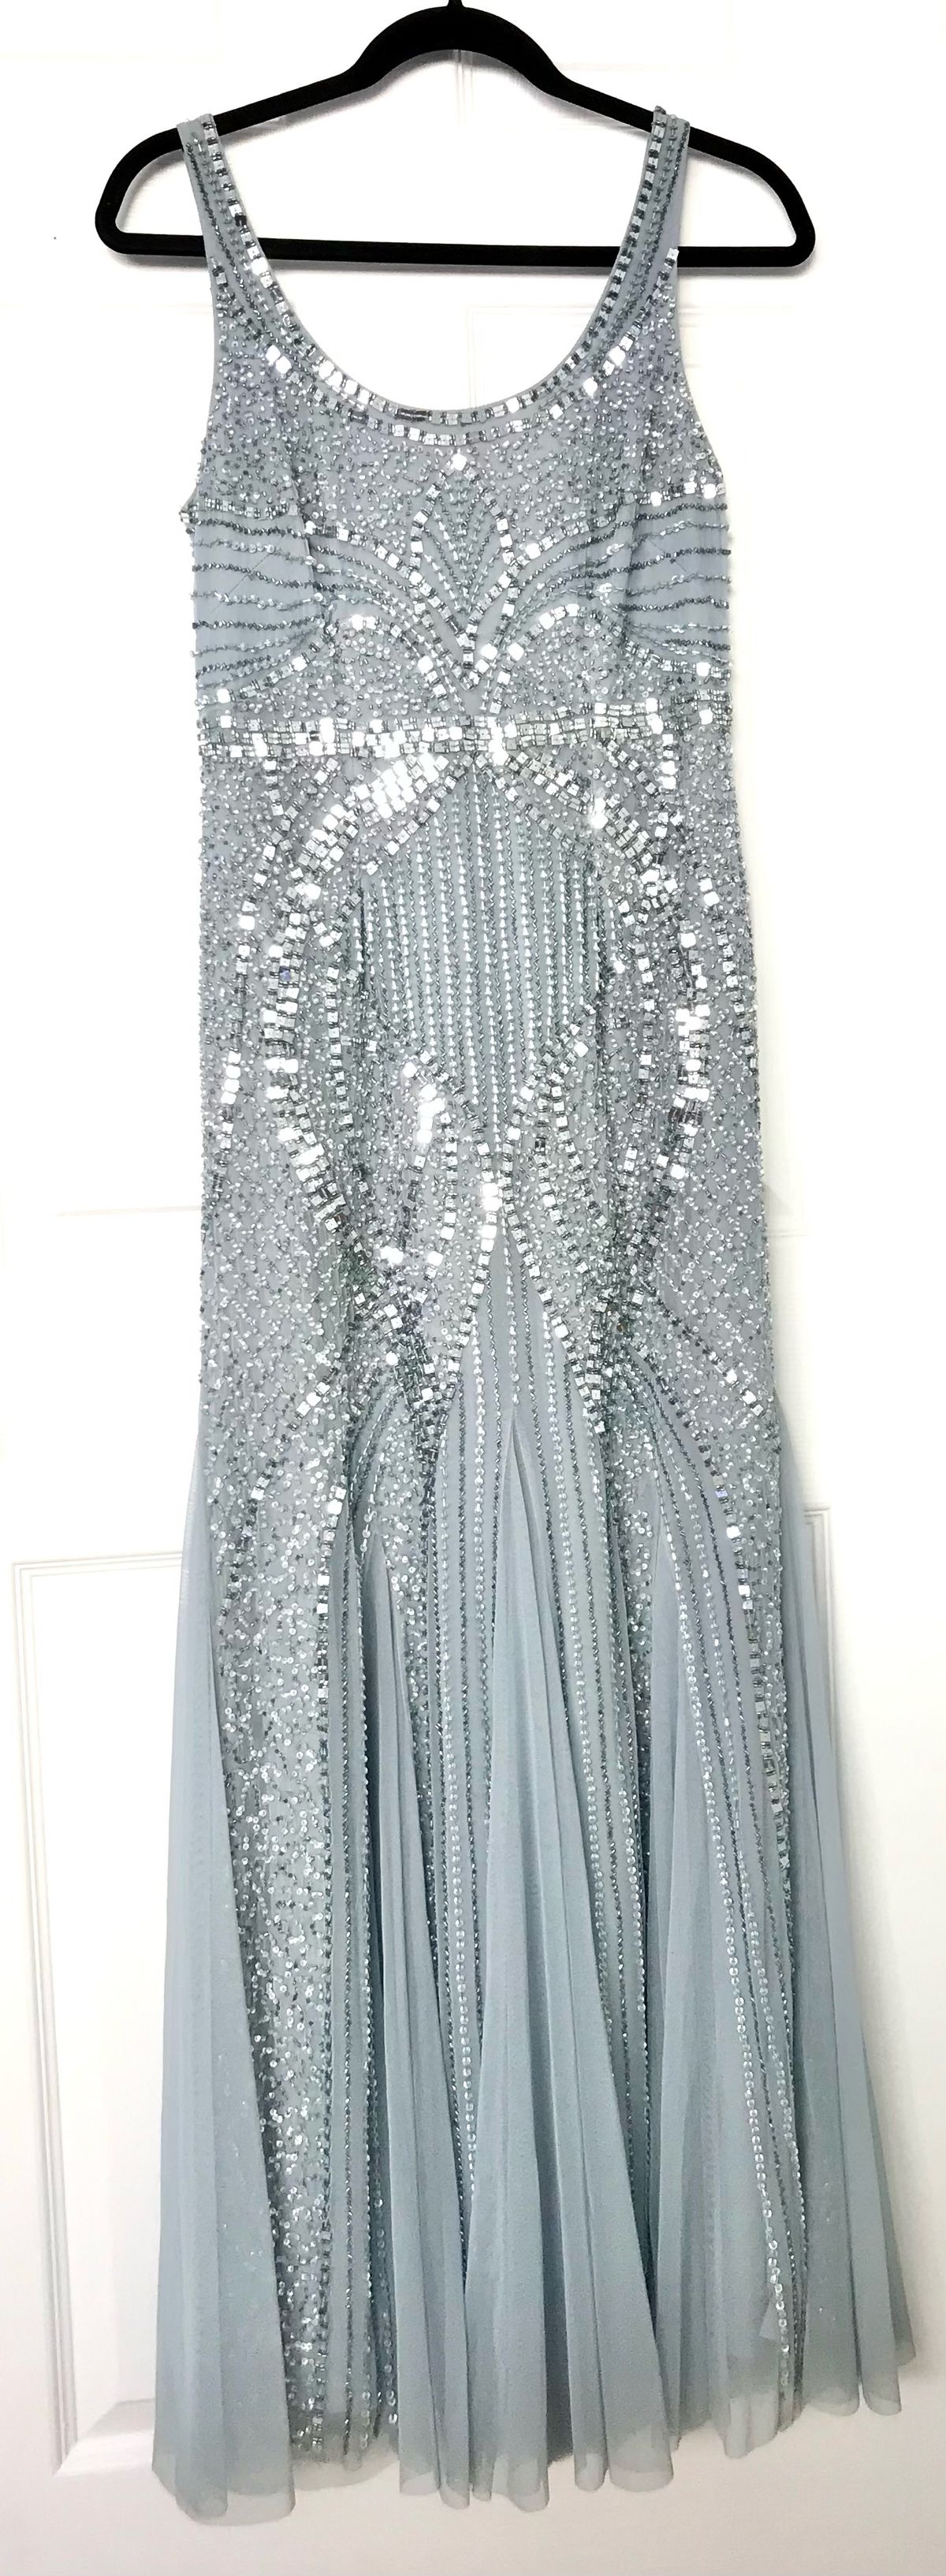 Adrianna Papell Size 8 Bridesmaid High Neck Sequined Light Blue Mermaid Dress on Queenly